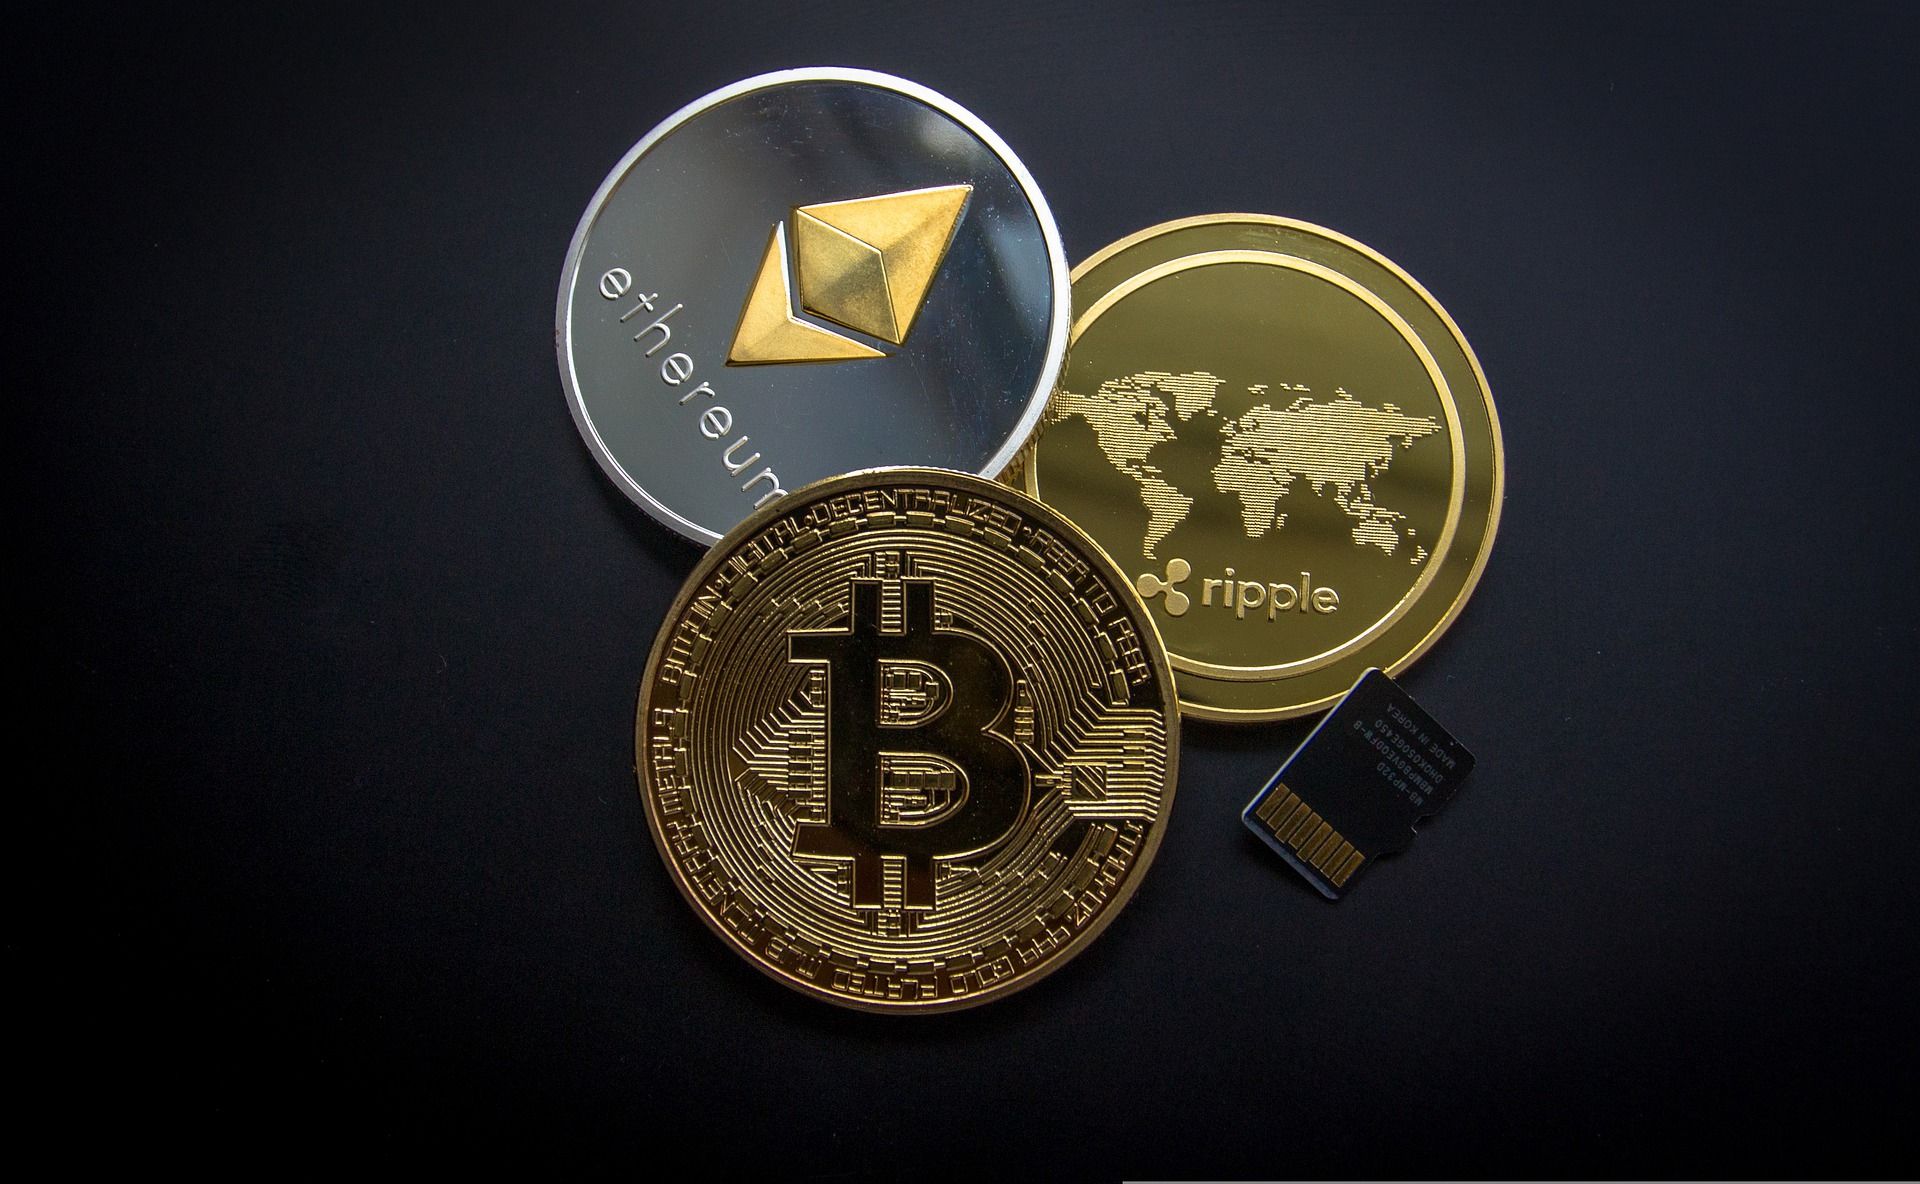 Top 5 cryptocurrencies of the day: Bitcoin up, FTX Token trends at no. 1